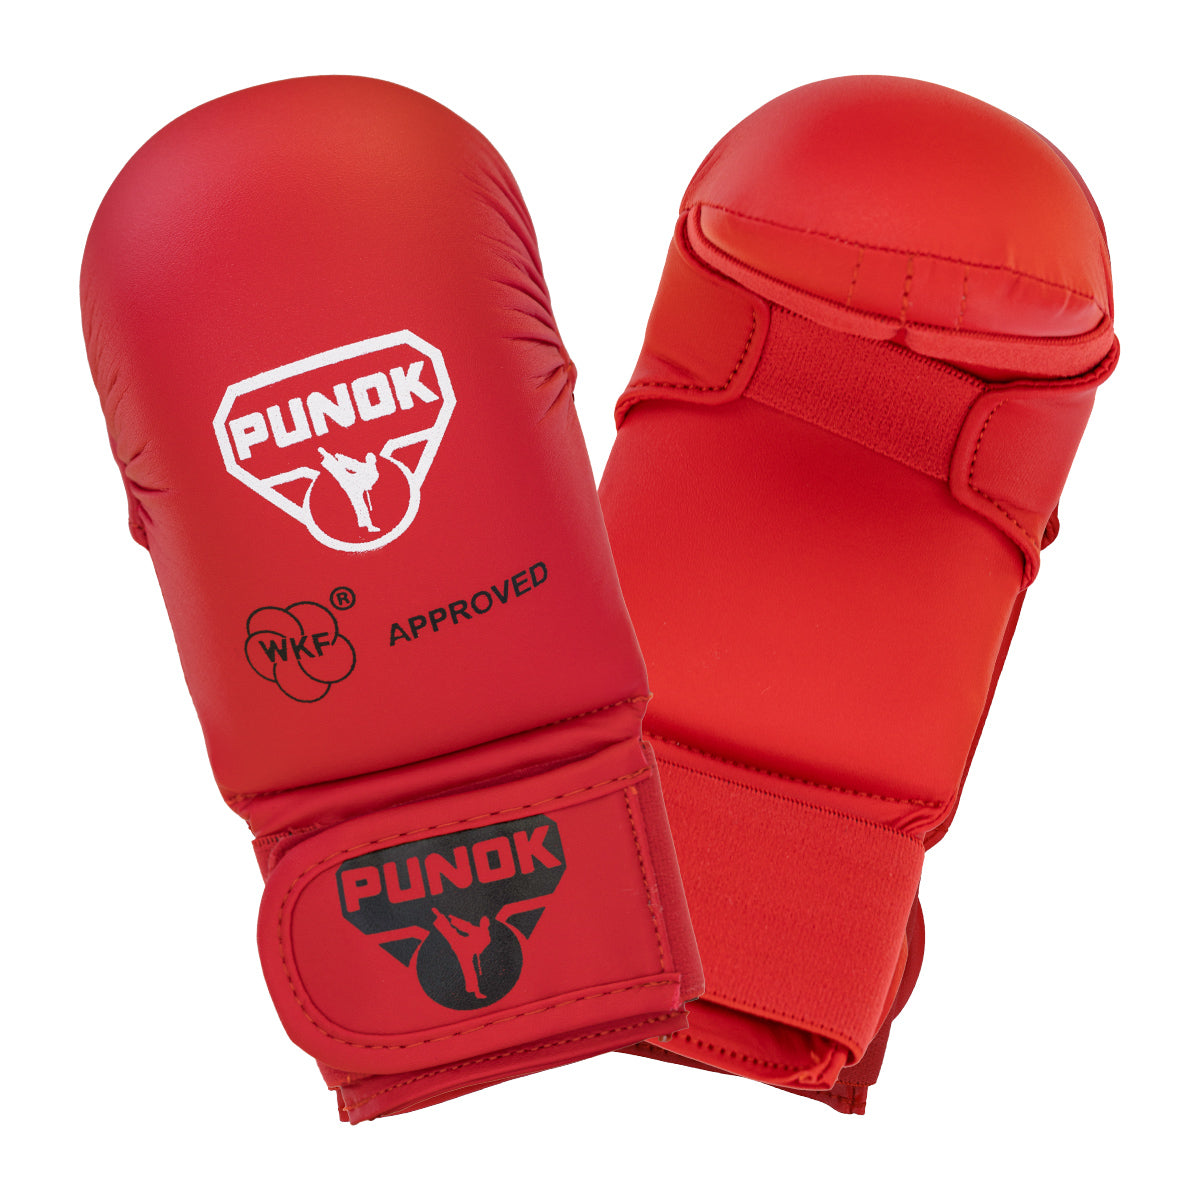 Punok WKF Approved Karate Punches